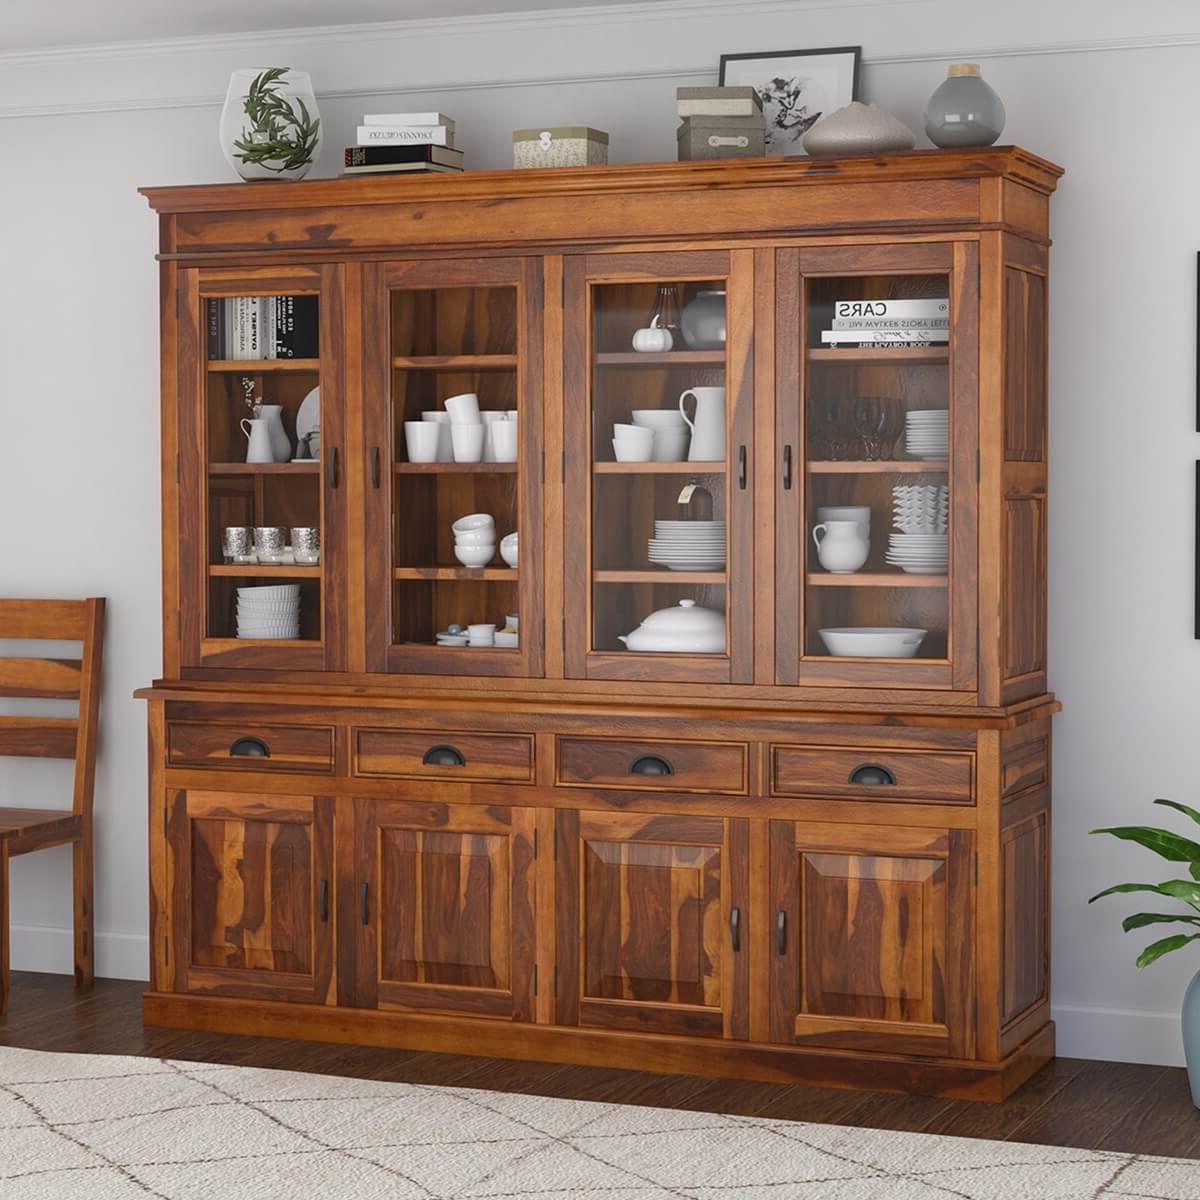 Cariboo Contemporary Rustic Solid Wood Dining Room Large Buffet Hutch In Latest Wide Buffet Cabinets For Dining Room (View 8 of 10)